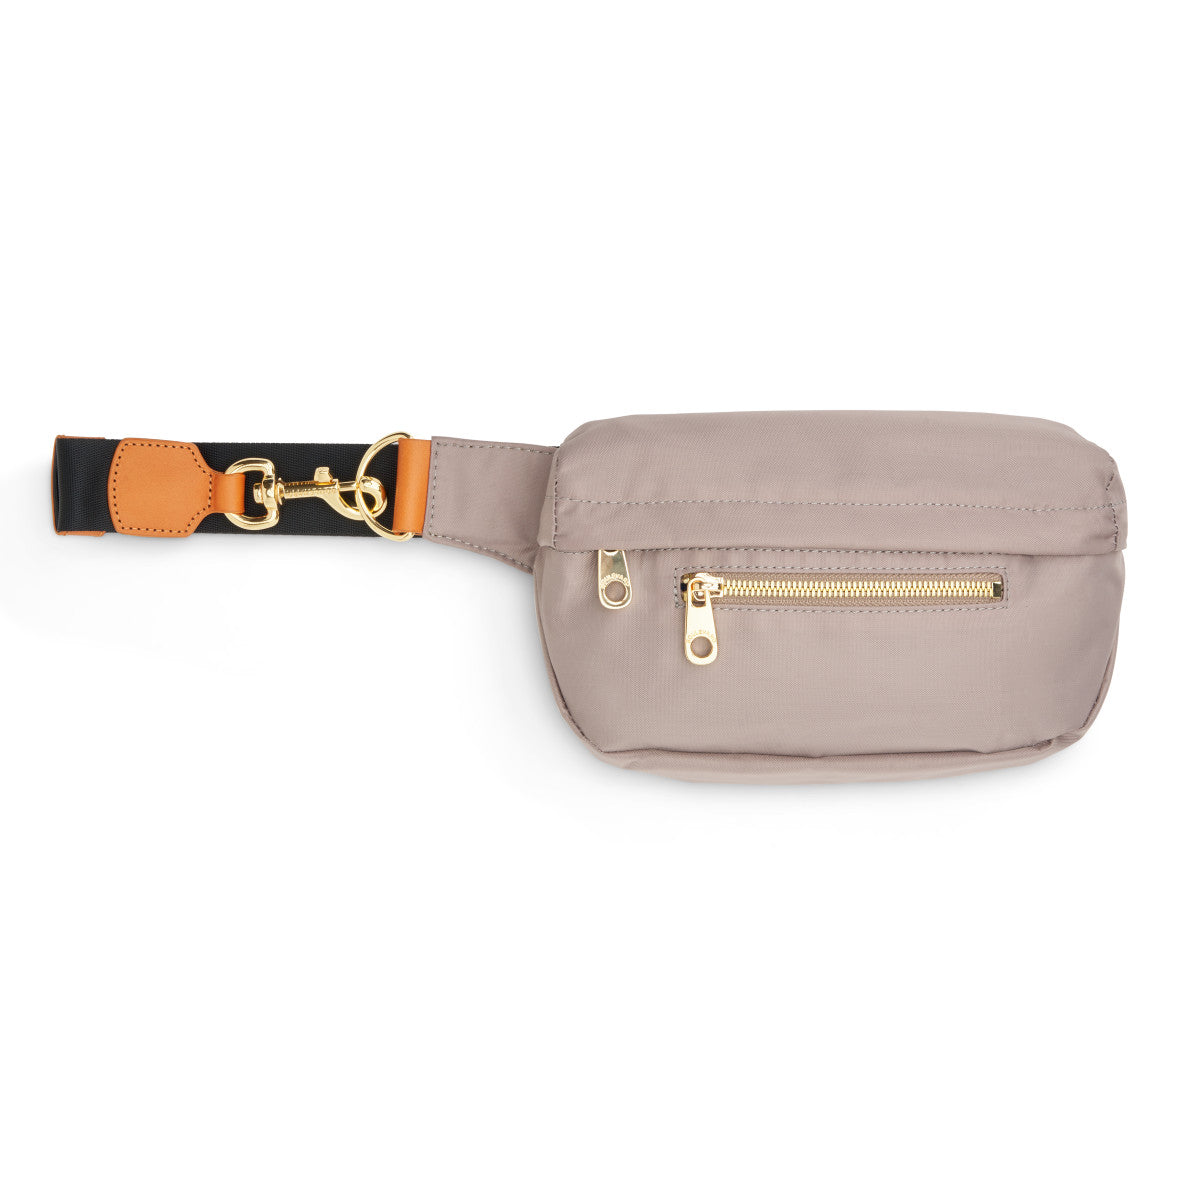 Franny Fanny Pack (multiple colors)